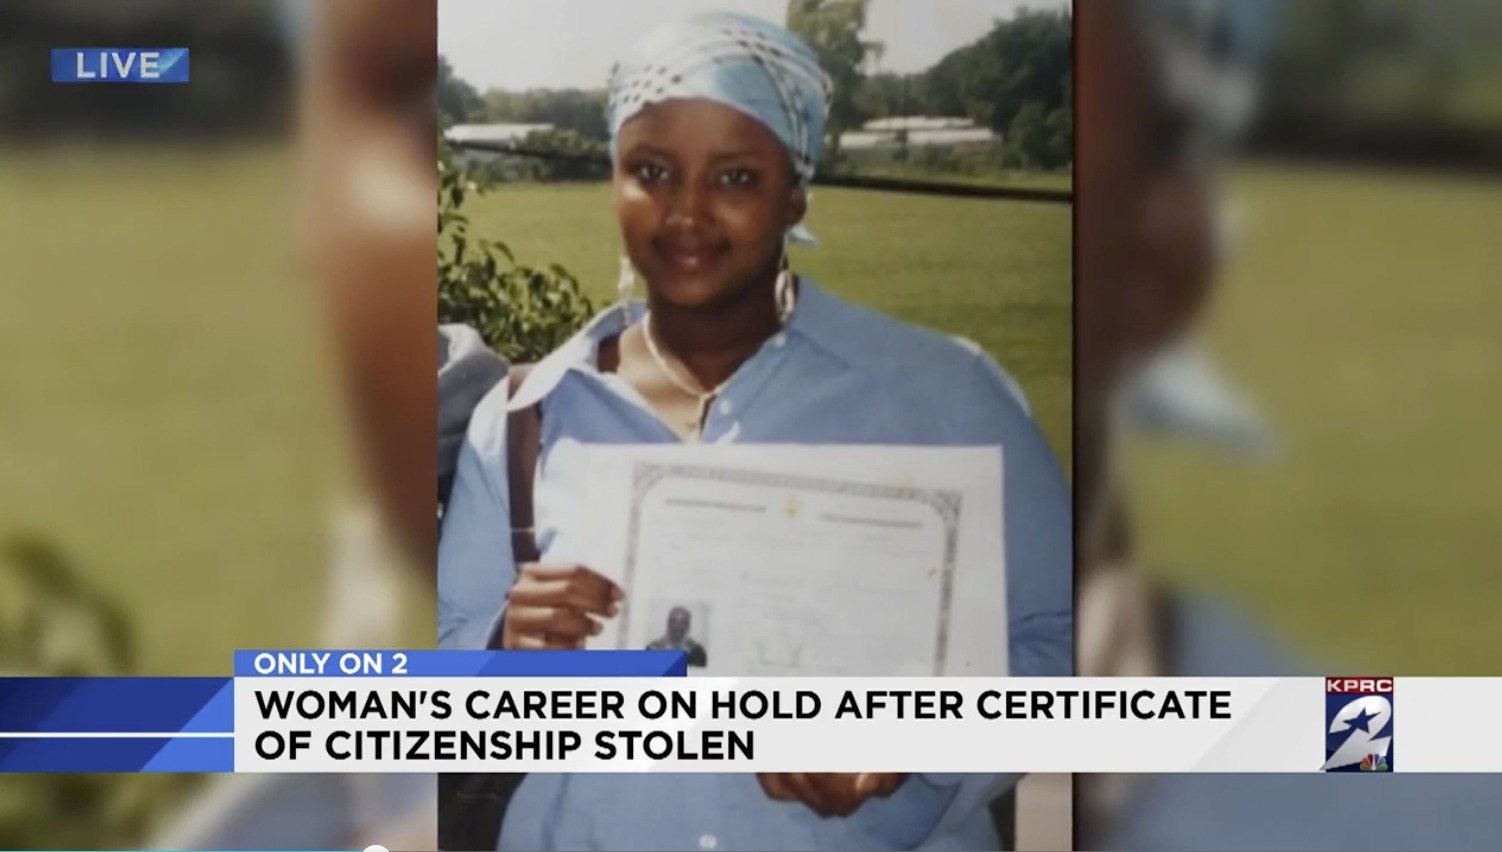 After important document is stolen from car, American citizen struggling to get replacement